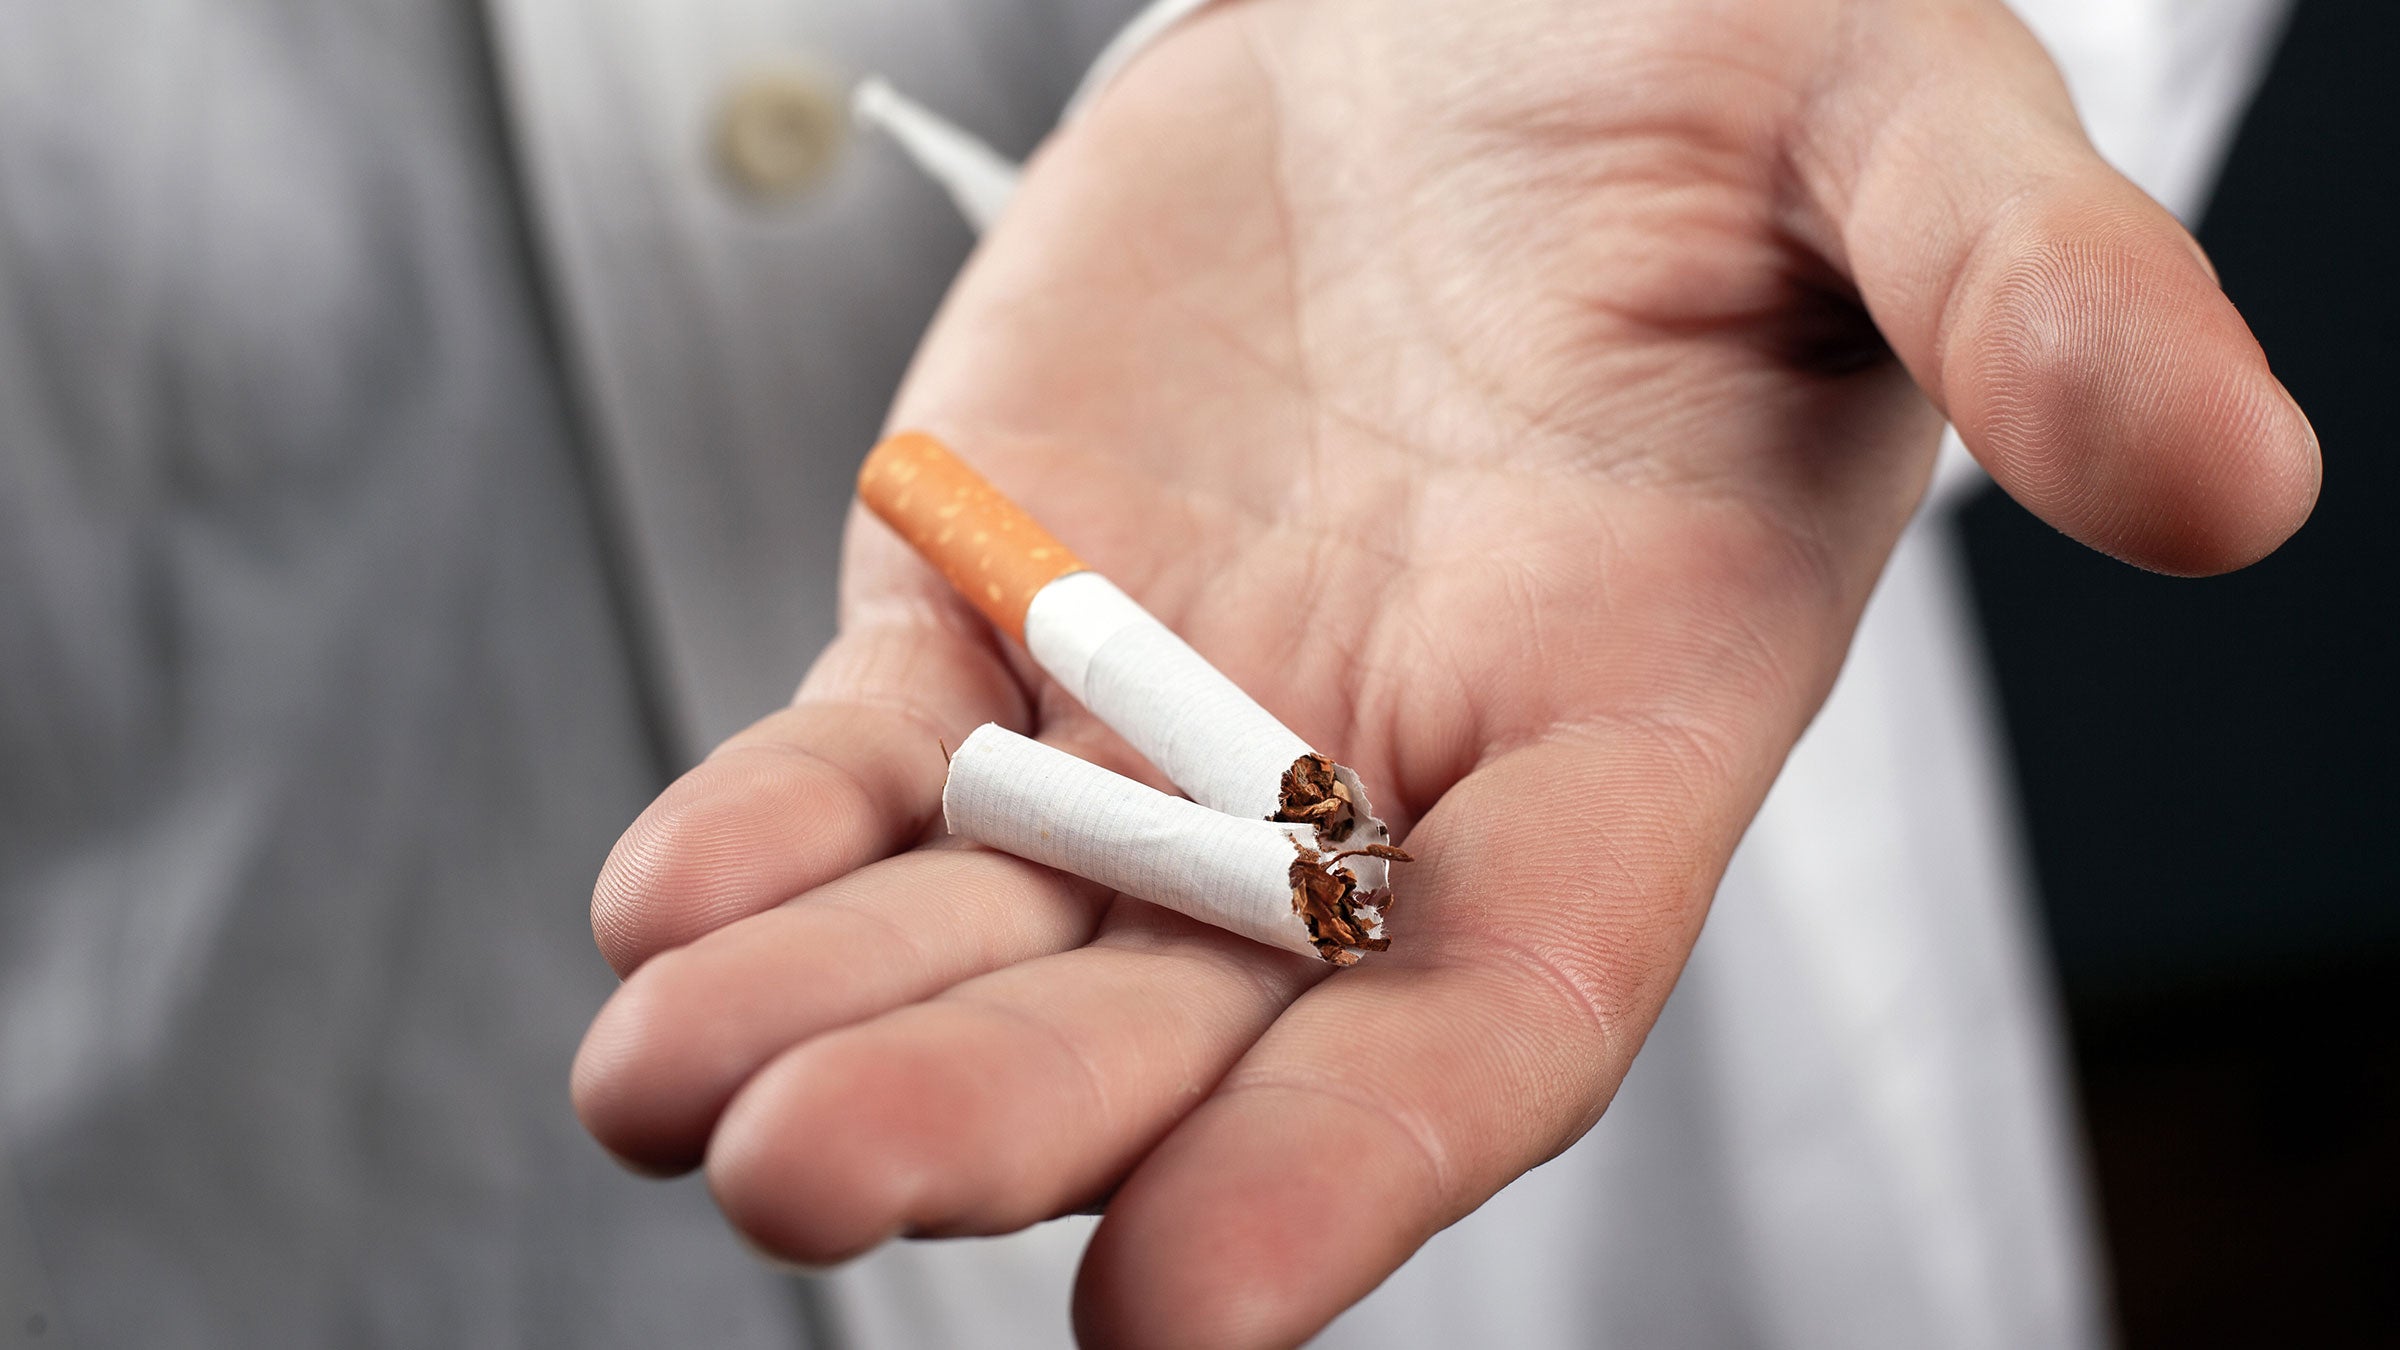 The Top 10 Reasons To Quit Smoking Right Now